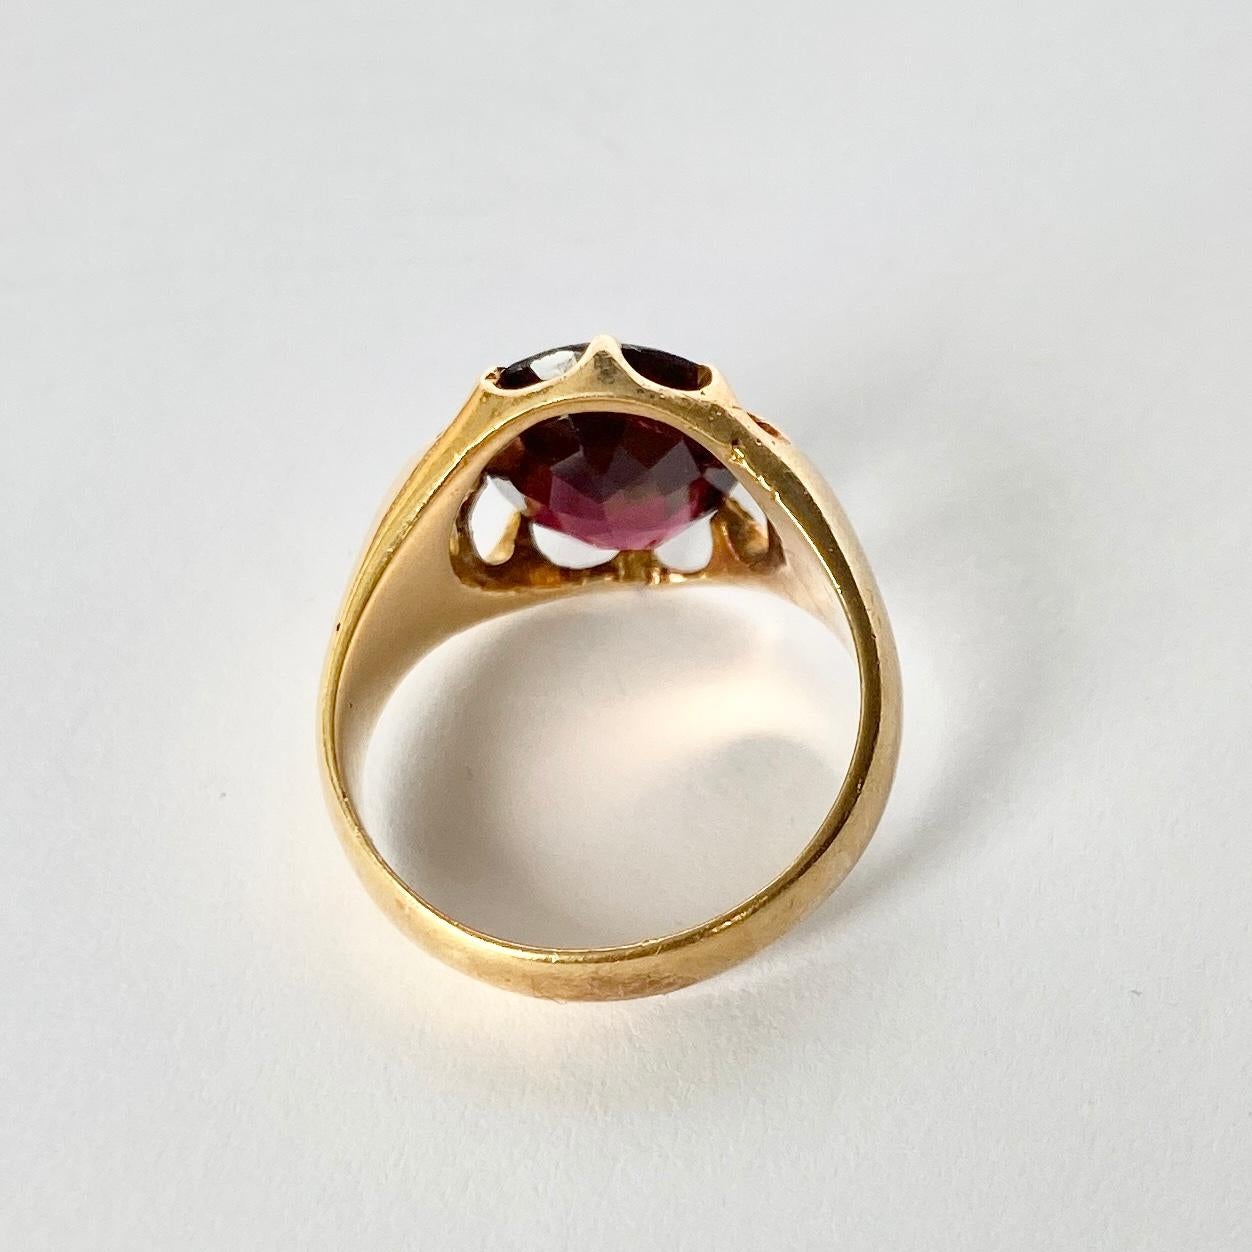 This simple style signet ring holds a garnet stone. Fully hallmarked Chester 1916, modelled in 18carat gold. 

Ring Size: L or 5 3/4
Stone Dimensions: 11x9mm

Weight: 5.6g